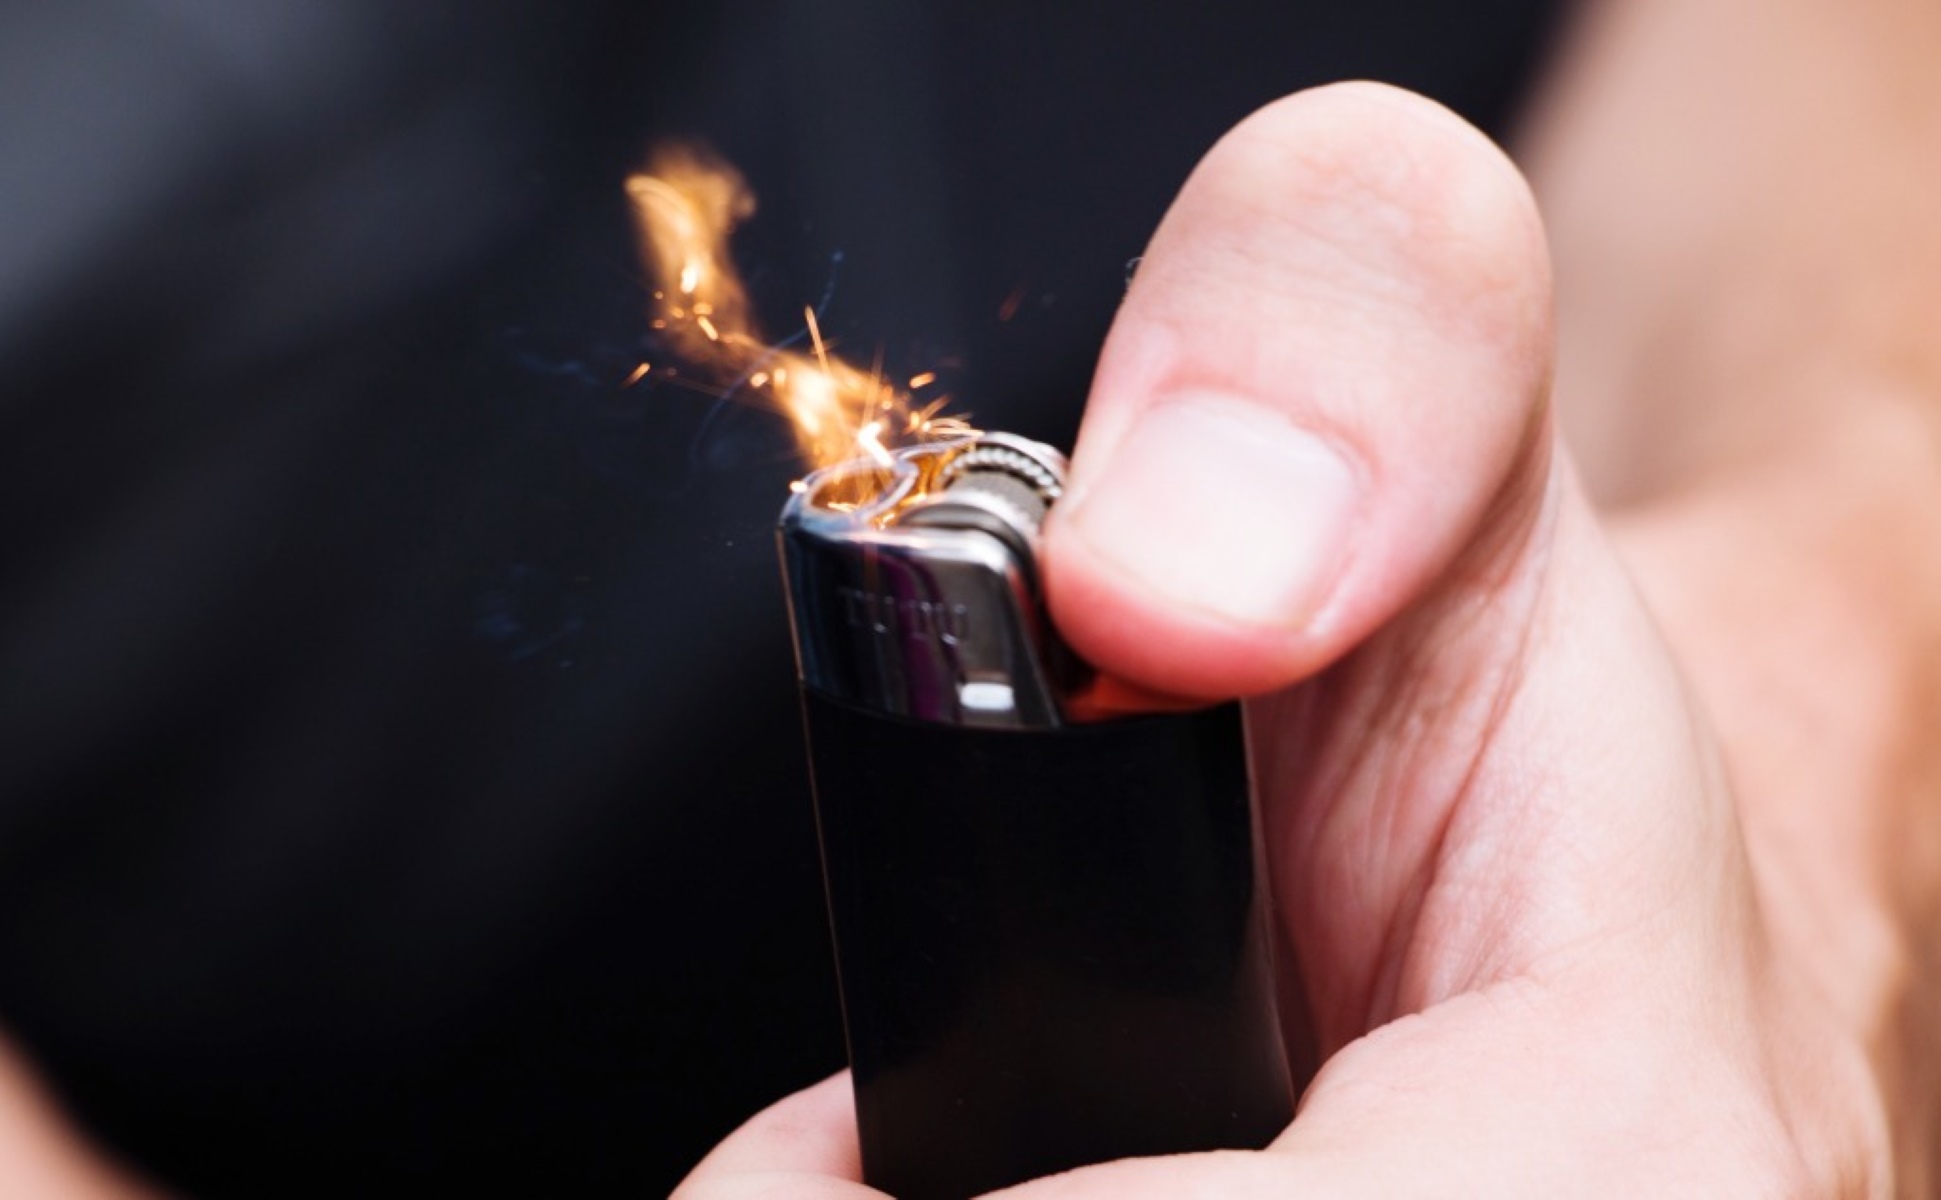 How To Use A Childproof Lighter